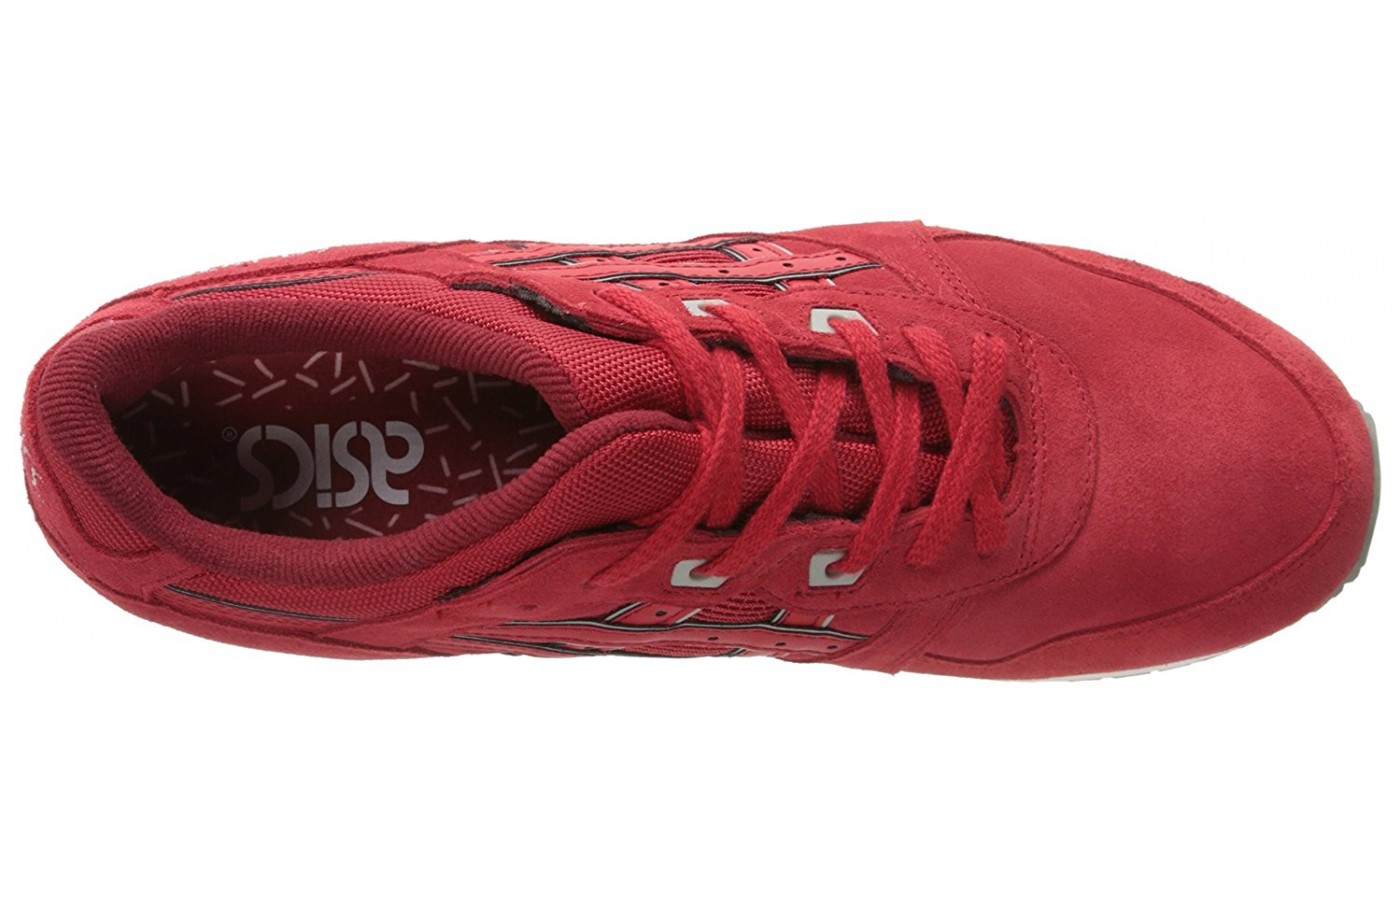 top view of the Asics Gel Lyte II